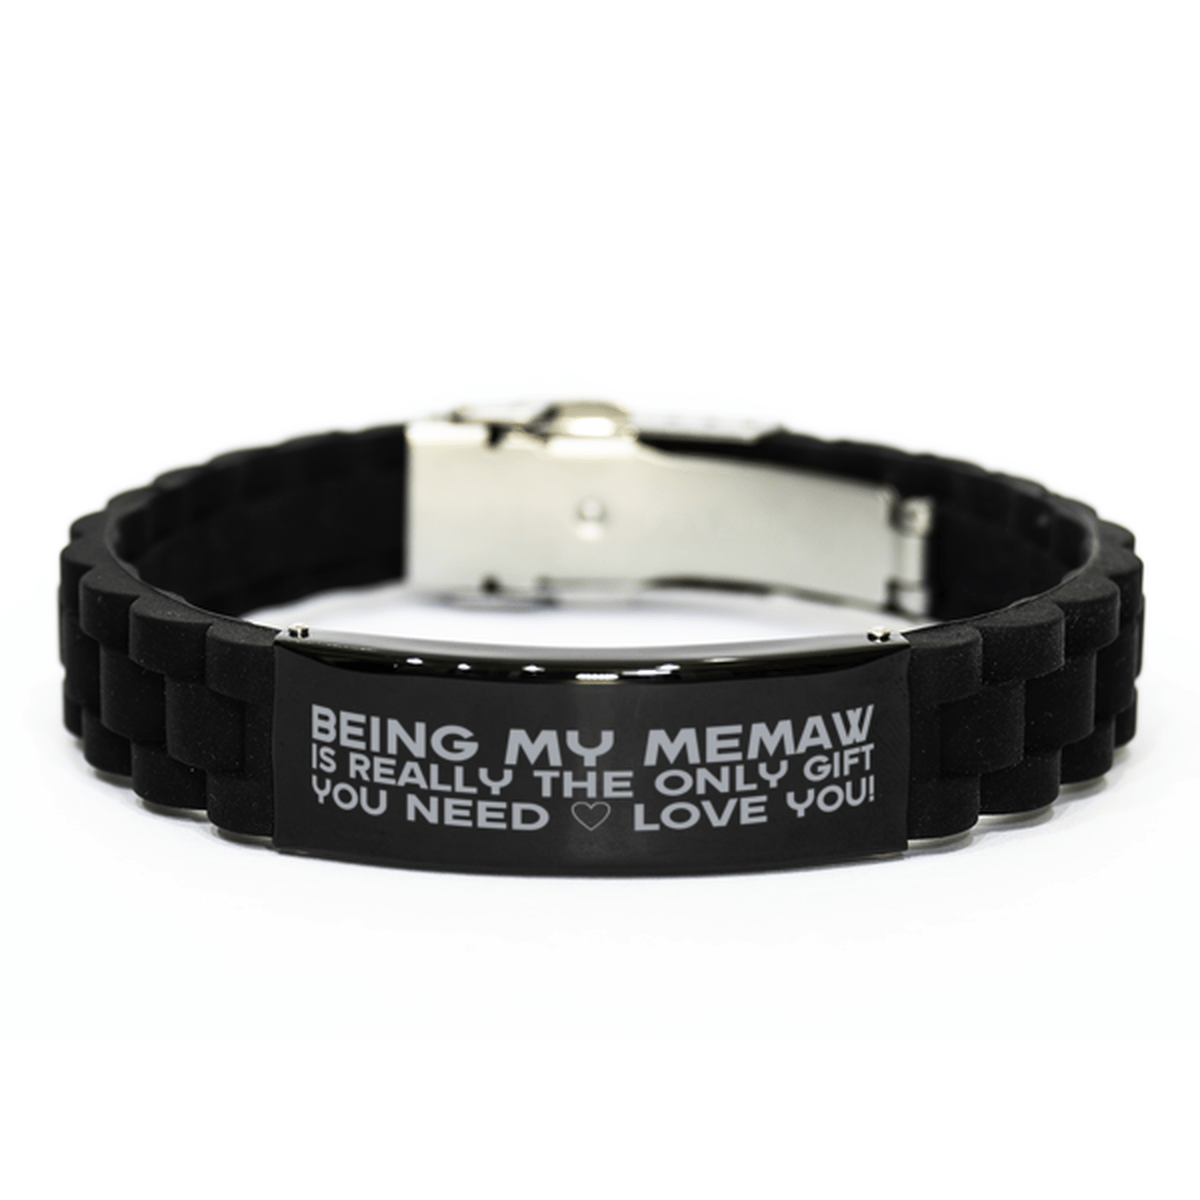 Funny Memaw Bracelet, Being My Memaw Is Really the Only Gift You Need, Best Birthday Gifts for Memaw